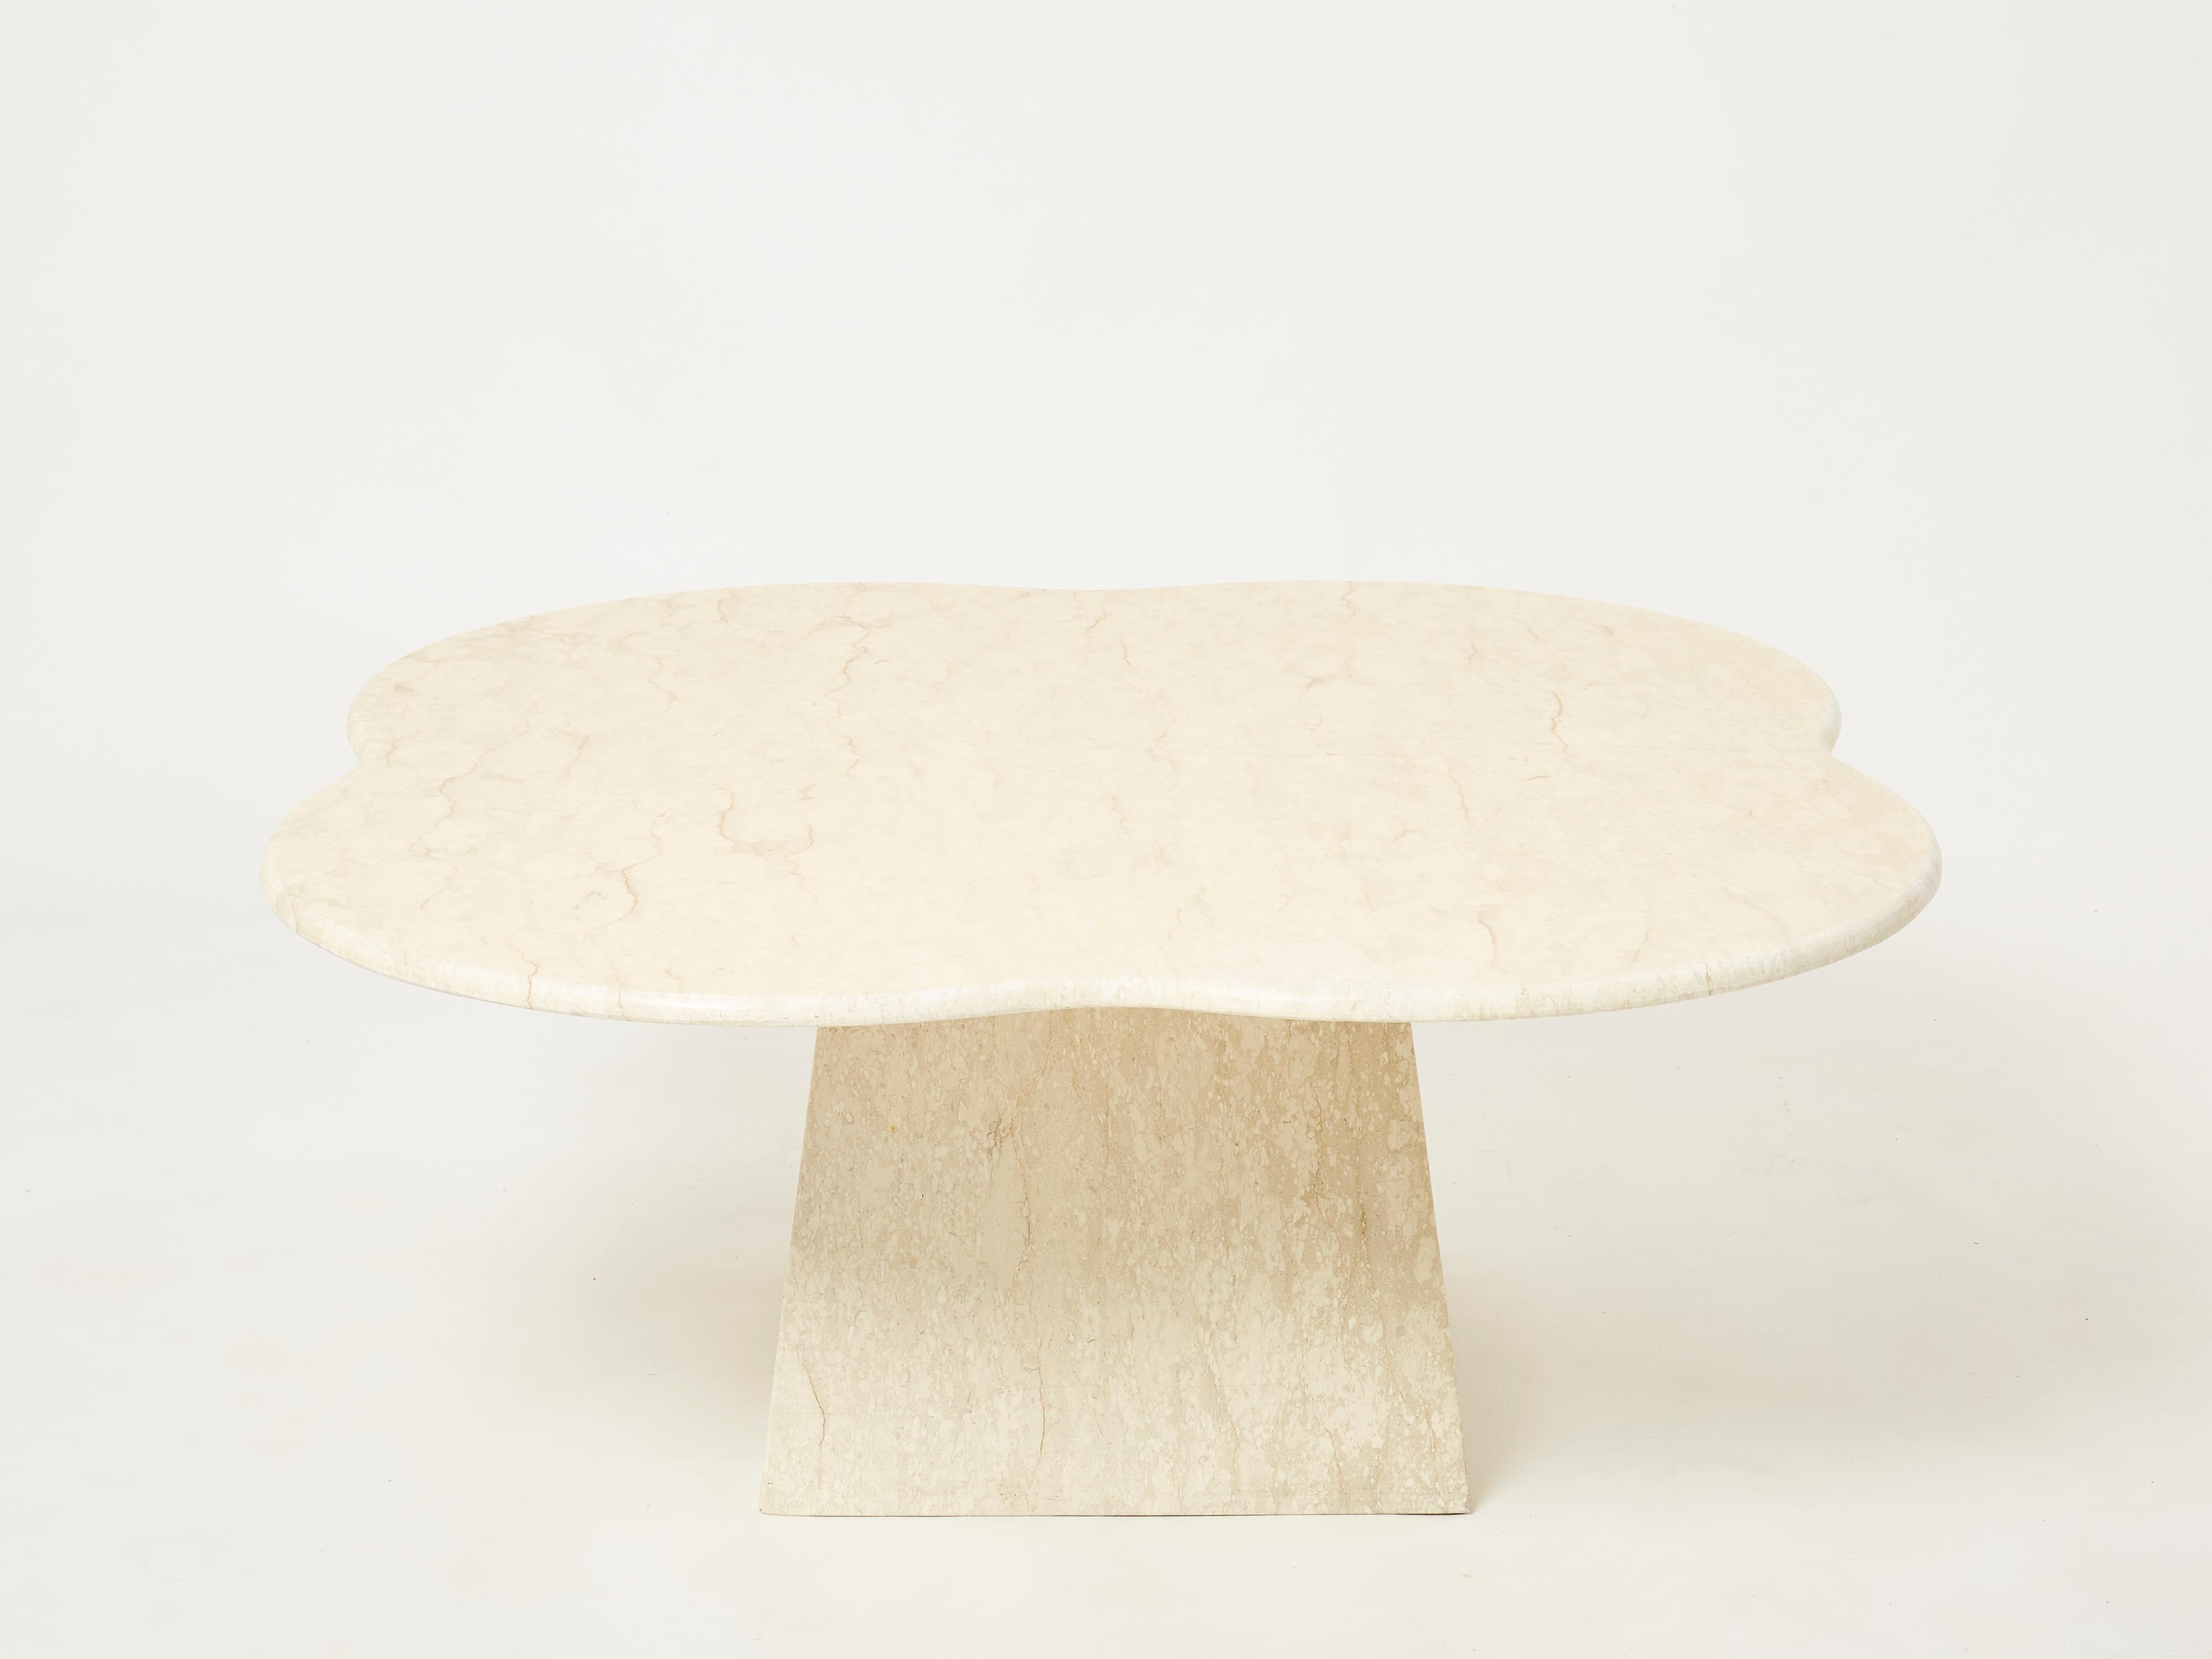 Unique vintage coffee table produced in Italy in the early 1970s from a beautiful travertine marble. The thick clover shaped surface of this coffee table is so slick yet intriguing, with beautiful veins and colors, making it a centerpiece of the